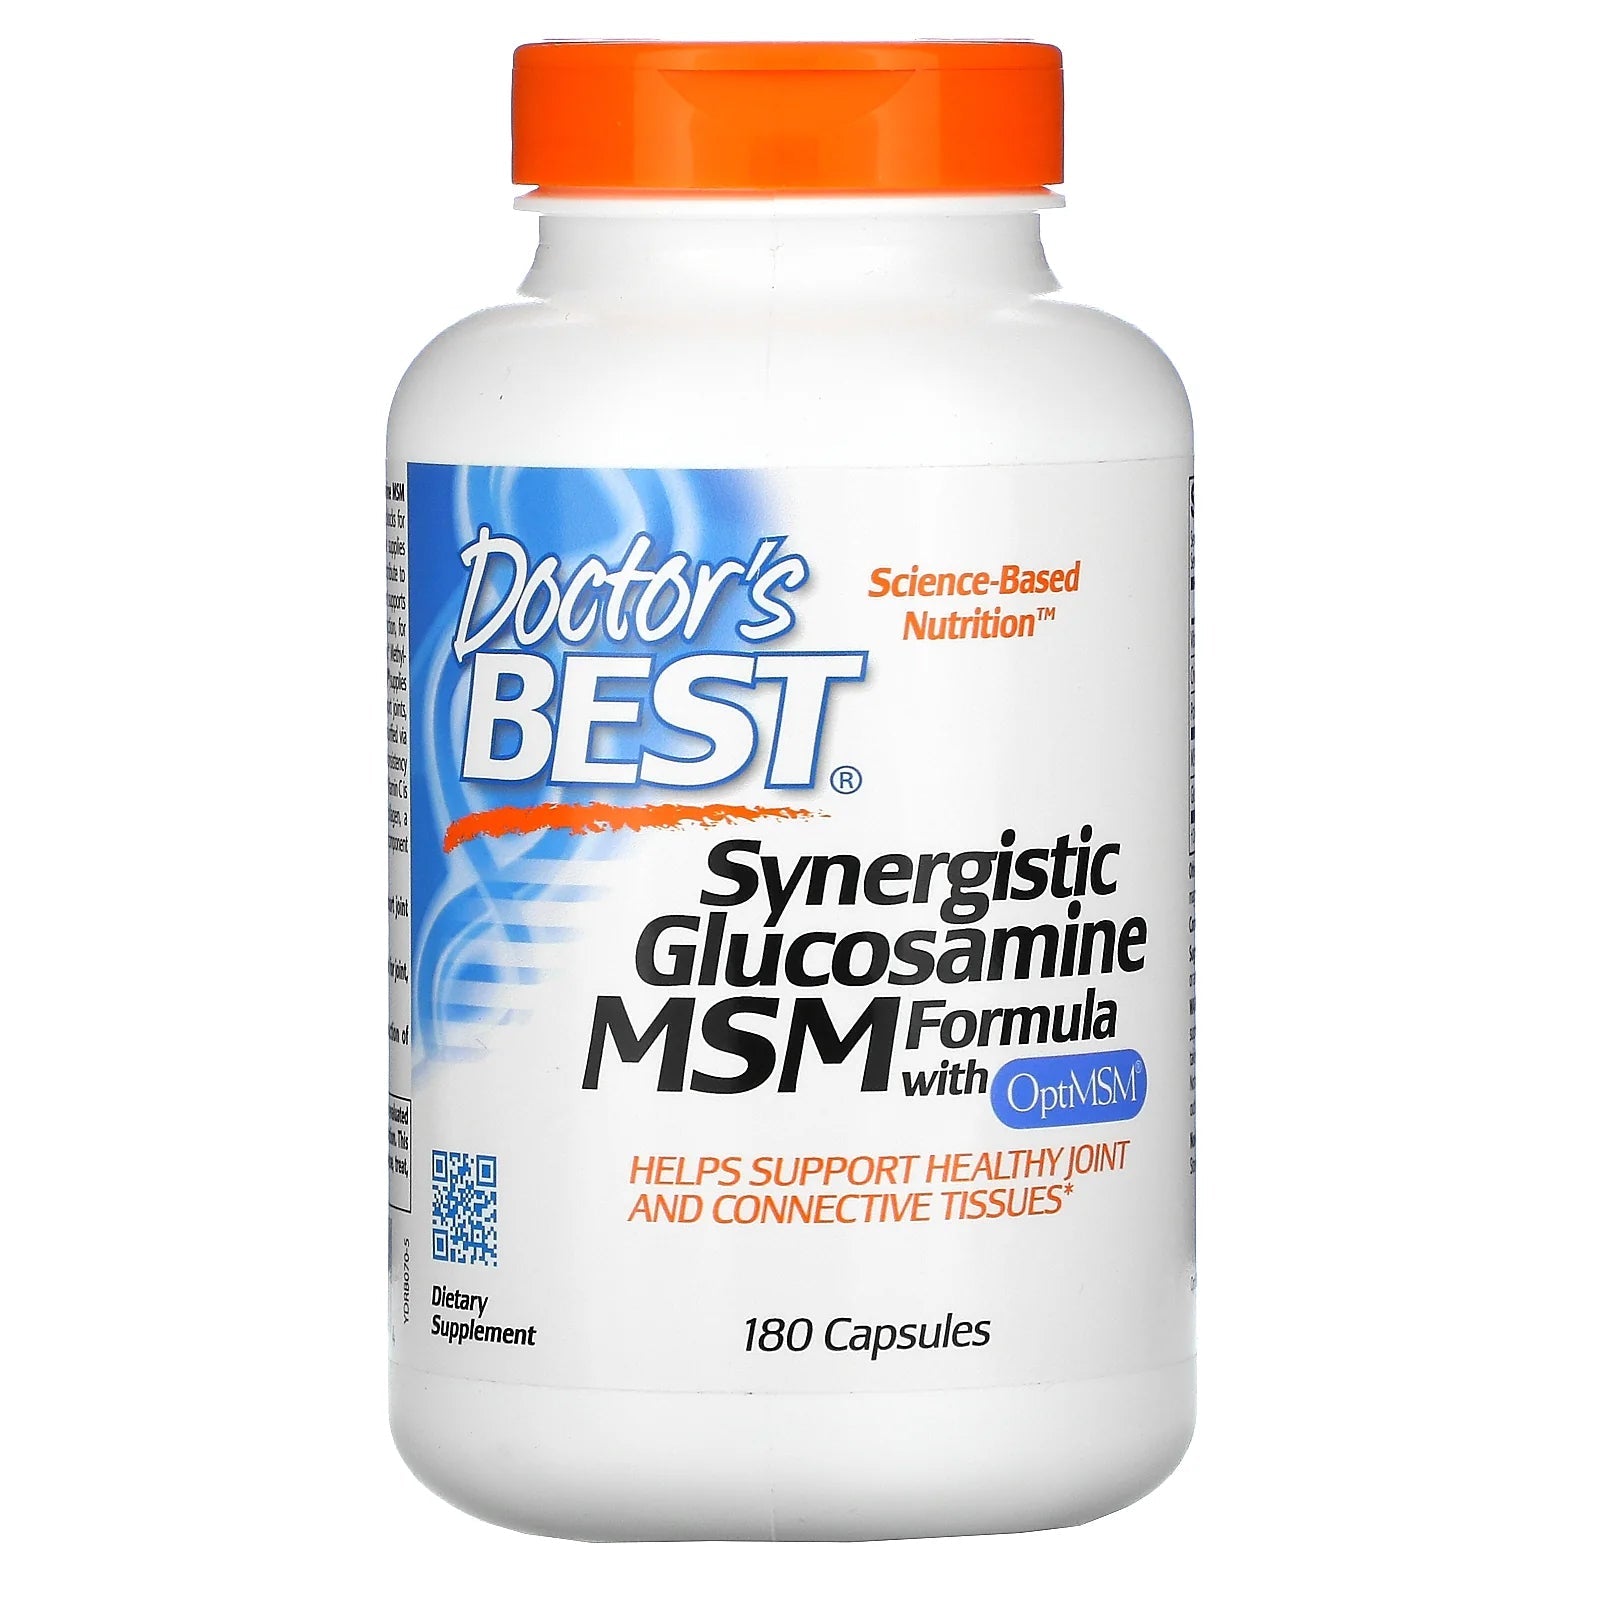 Doctor's Best Synergistic Glucosamine MSM Formula with OptiMSM 180 Capsules